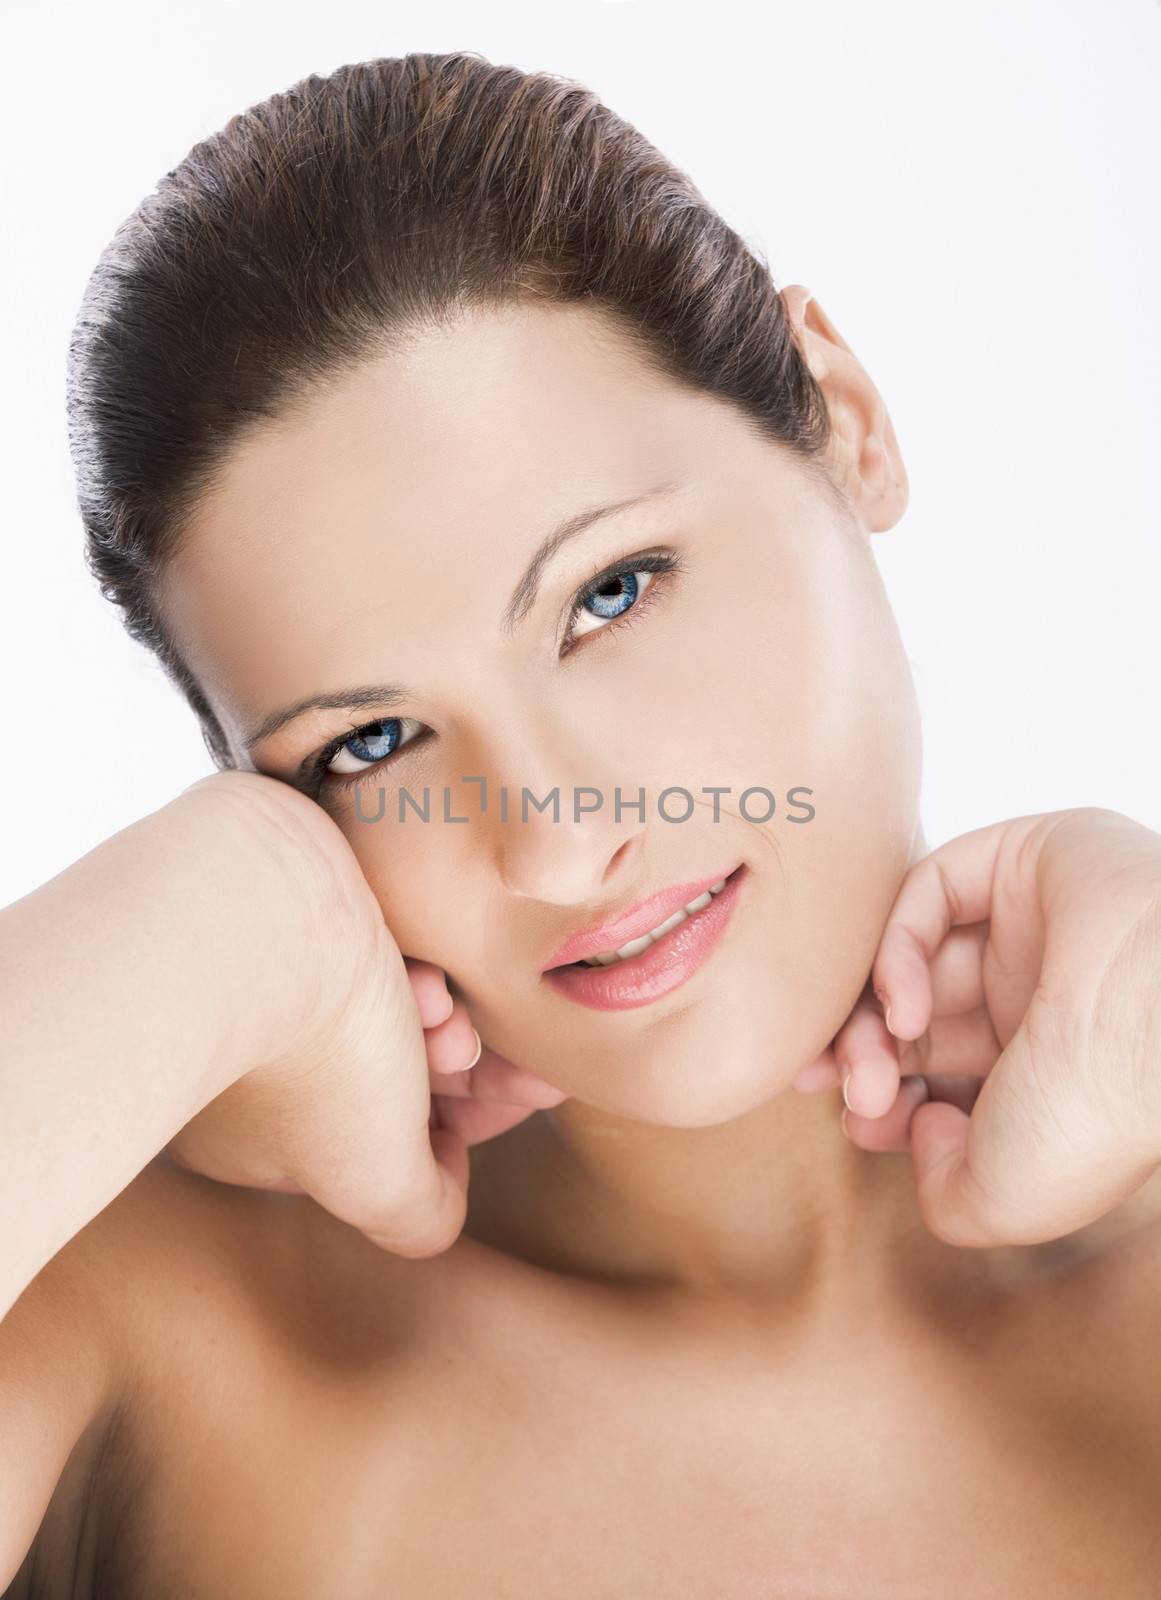 Portrait of a beautiful blonde woman, isolated on white background